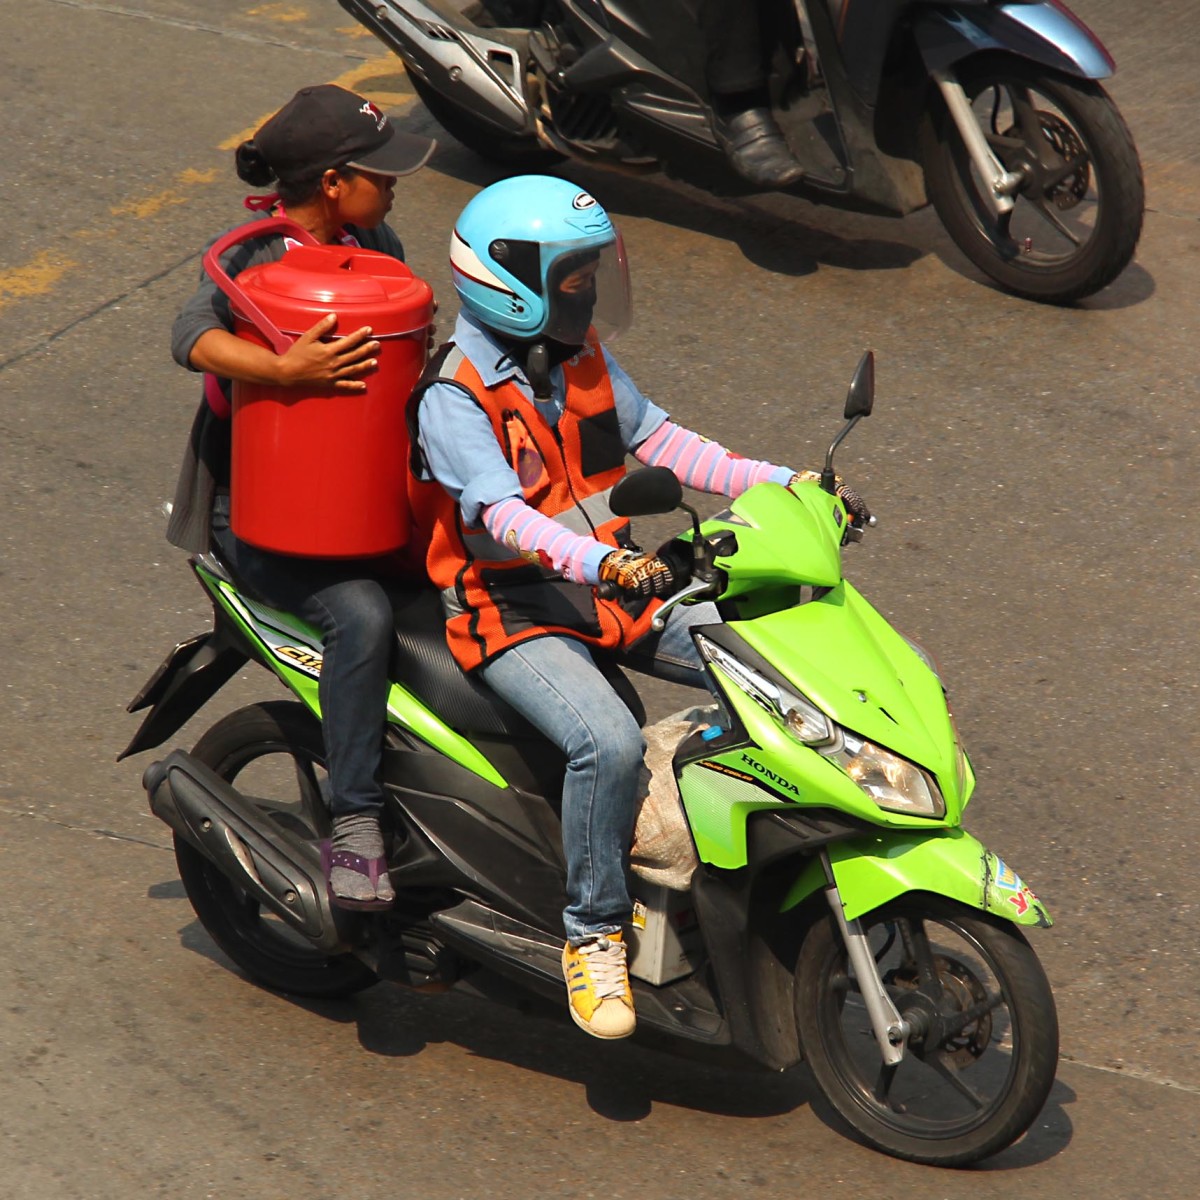 Motocycle taxi at work - clearly the limitations on how much you can carry are not too restrictive for this passenger